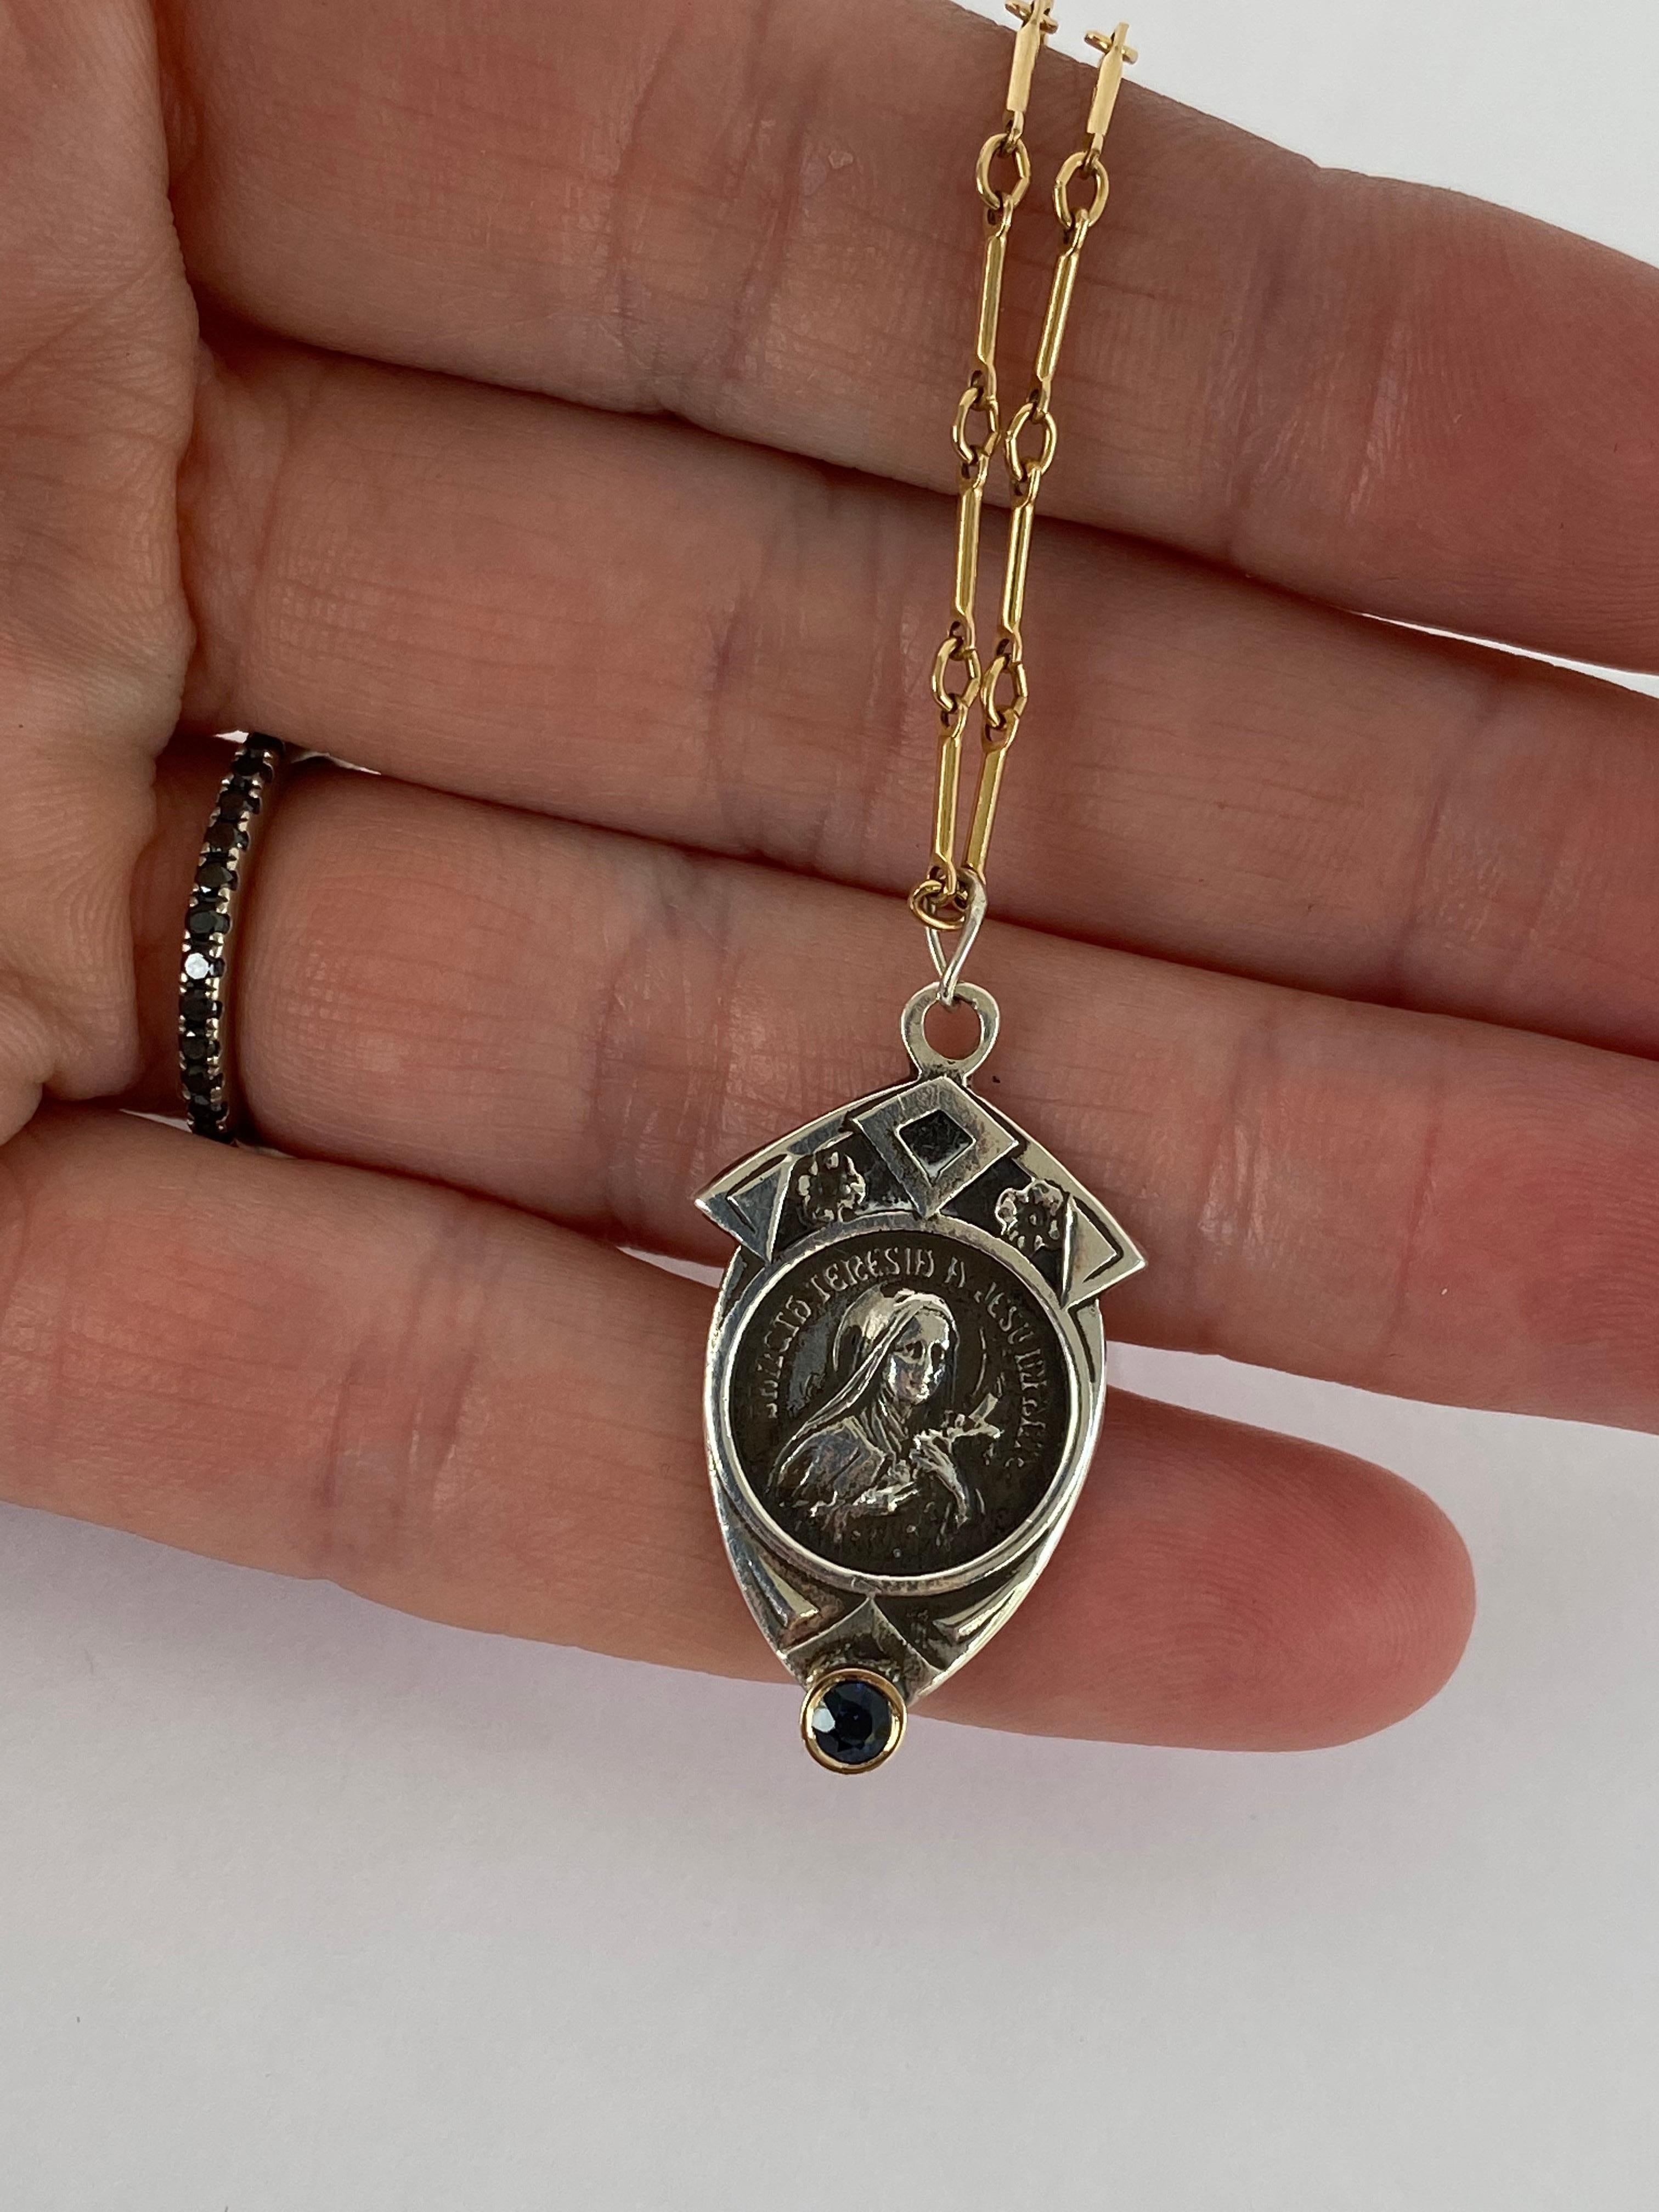 Black Diamond Medal Necklace Chain Virgin Mary Silver

Exclusive piece with a Virgin Mary Medal in Silver with a Black Diamond set in a Gold Prong prong  with a gold filled Chain. 

Symbols or medals can become a powerful tool in our arsenal for the